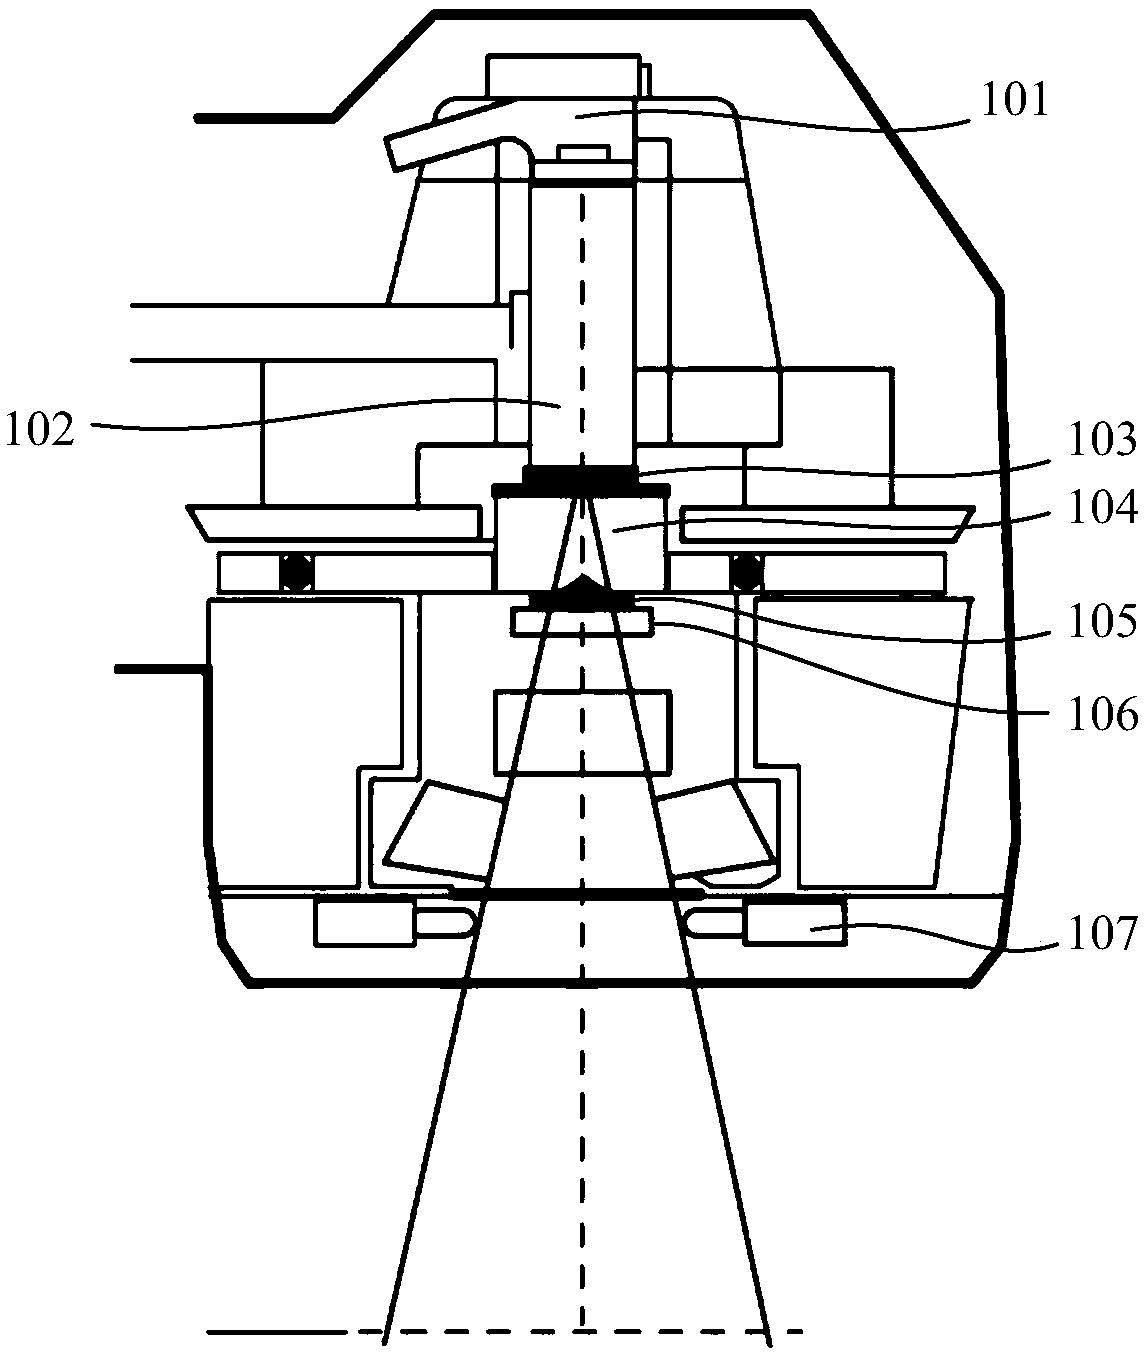 Dosage monitoring device and linear accelerator